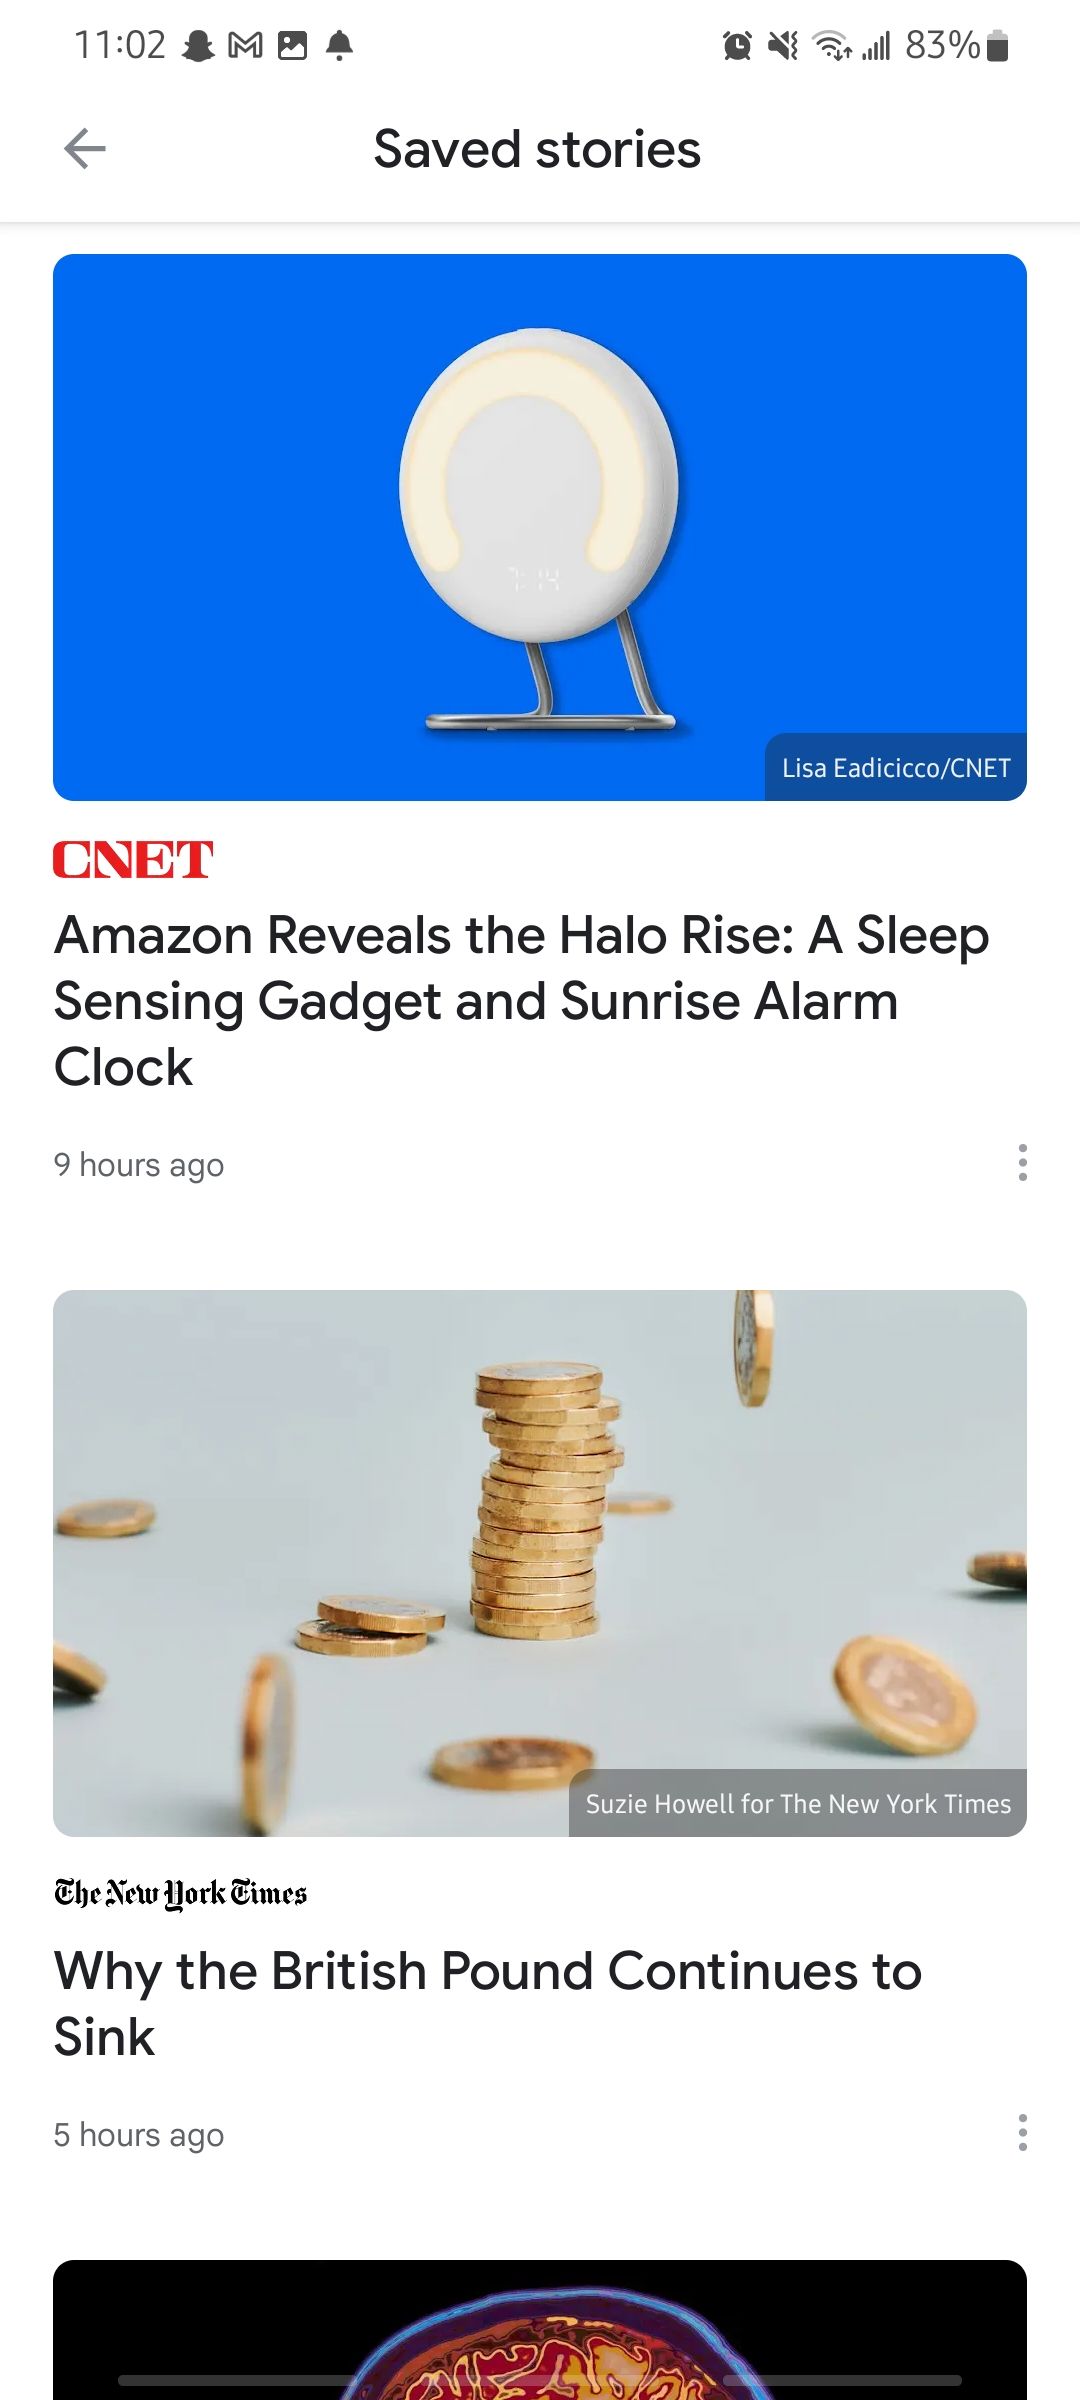 a closer look at saved stories in the google news app